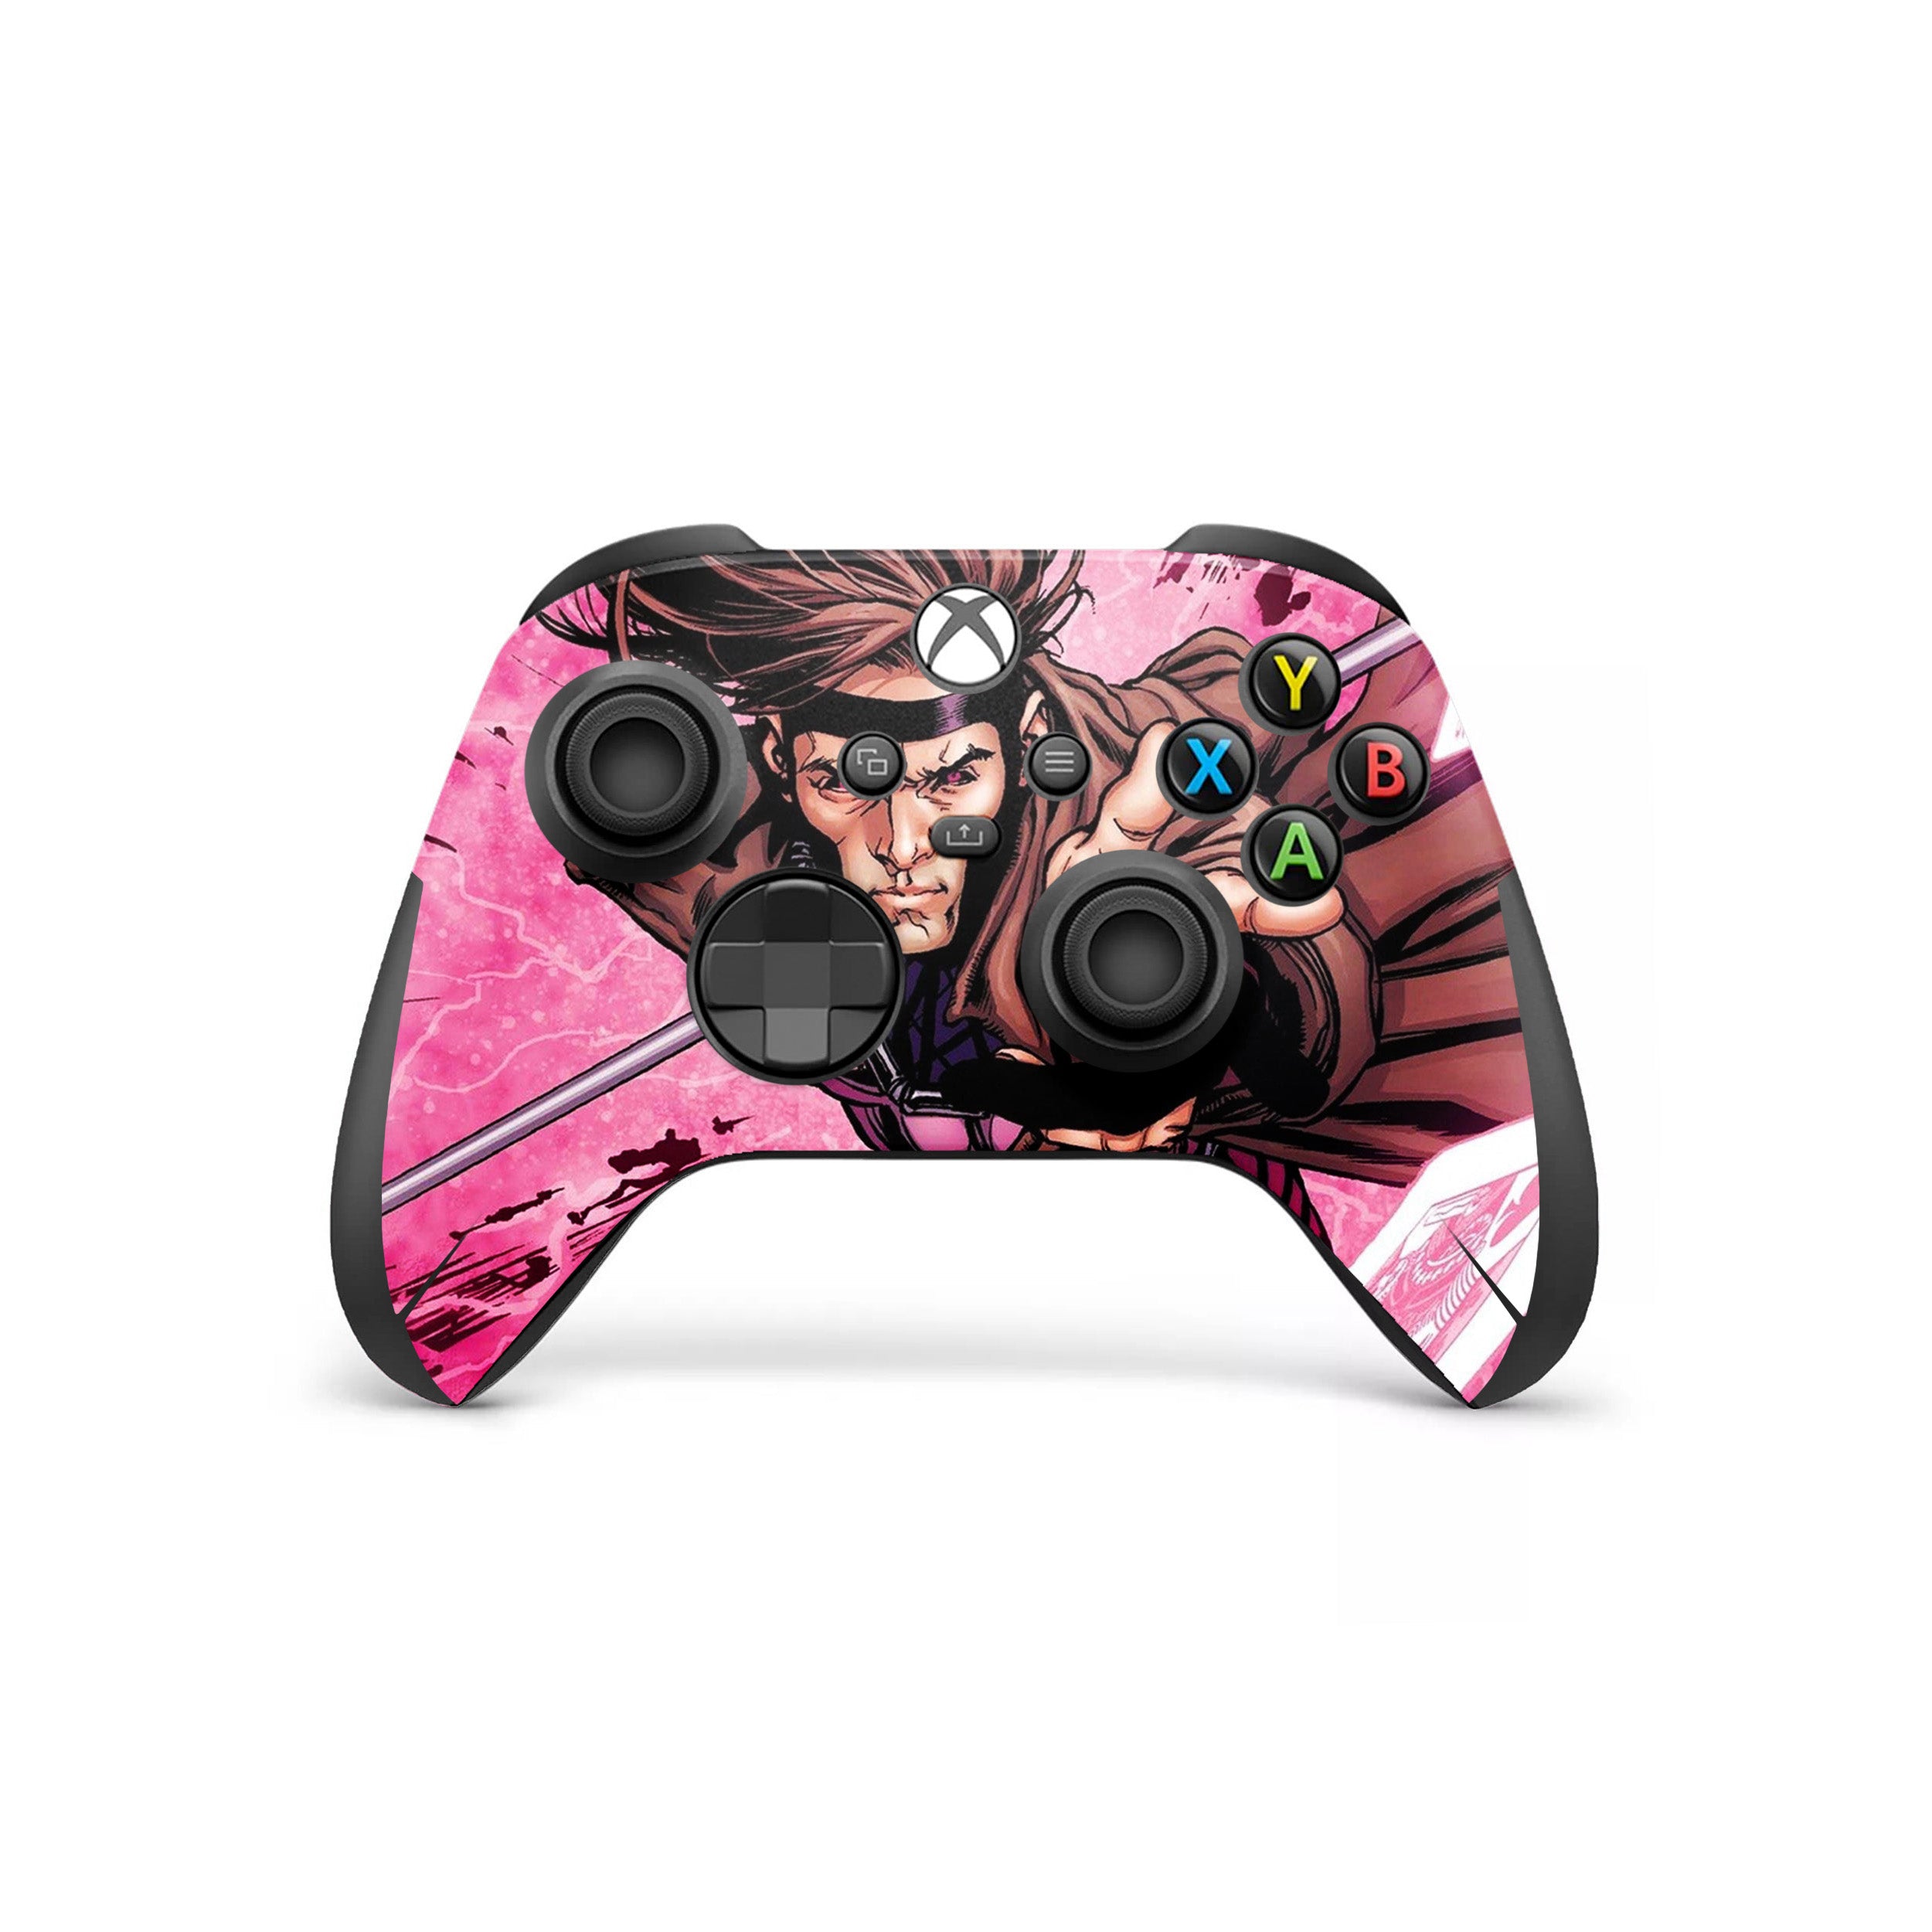 A video game skin featuring a Marvel Comics X Men Gambit design for the Xbox Wireless Controller.